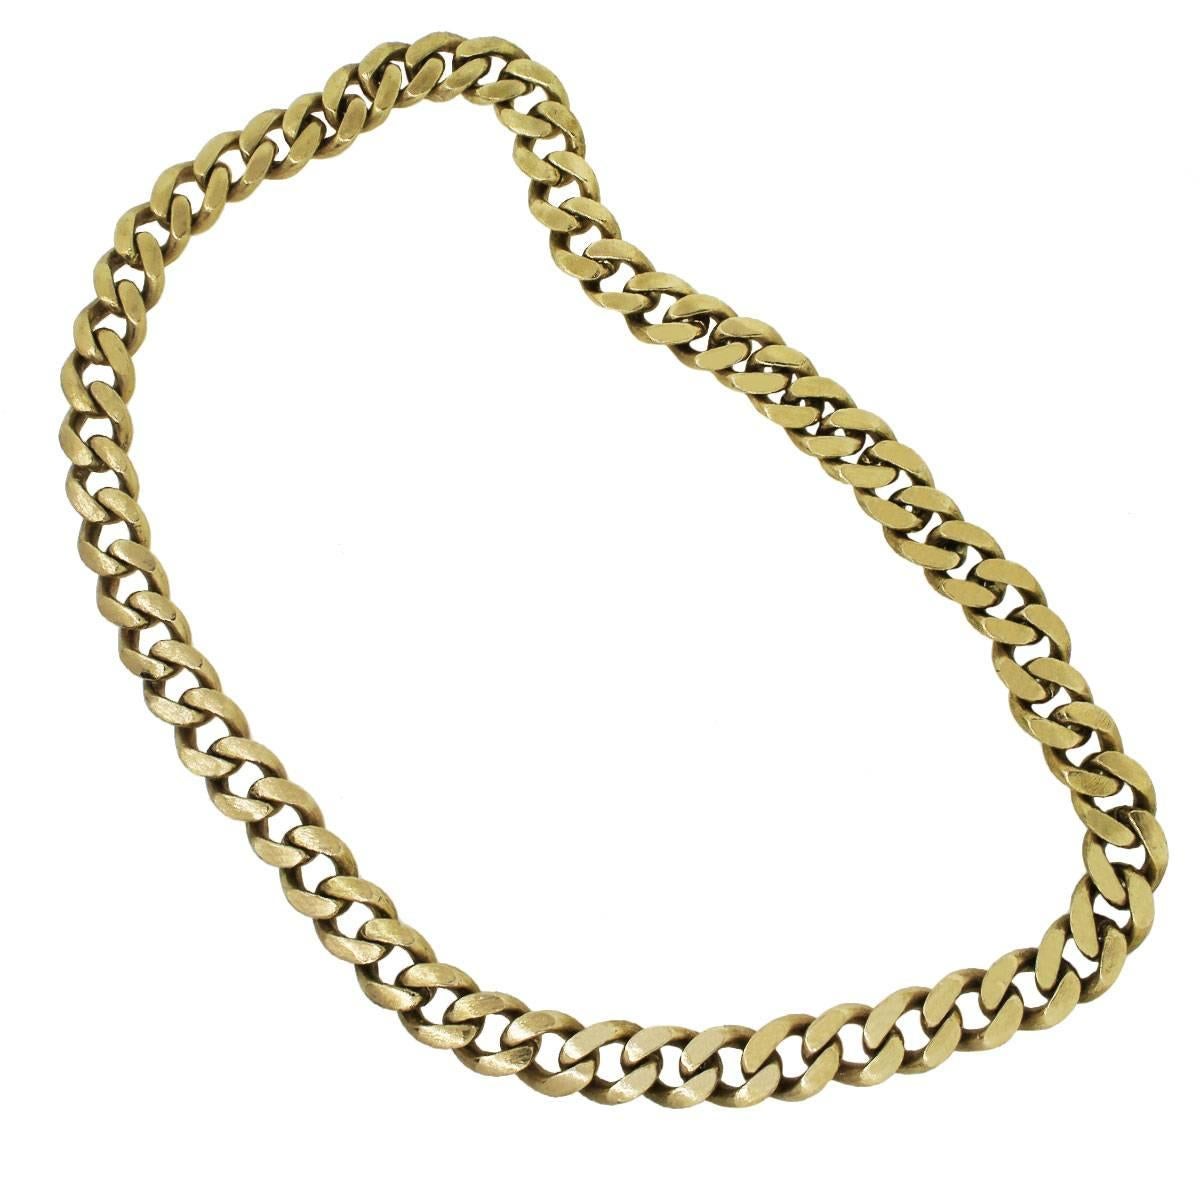 Material: 18k yellow gold
Necklace Measurements: 30″
Item Weight: 720.5g (463.3dwt) – 1.6lbs
Clasp: No clasp
SKU: G7120